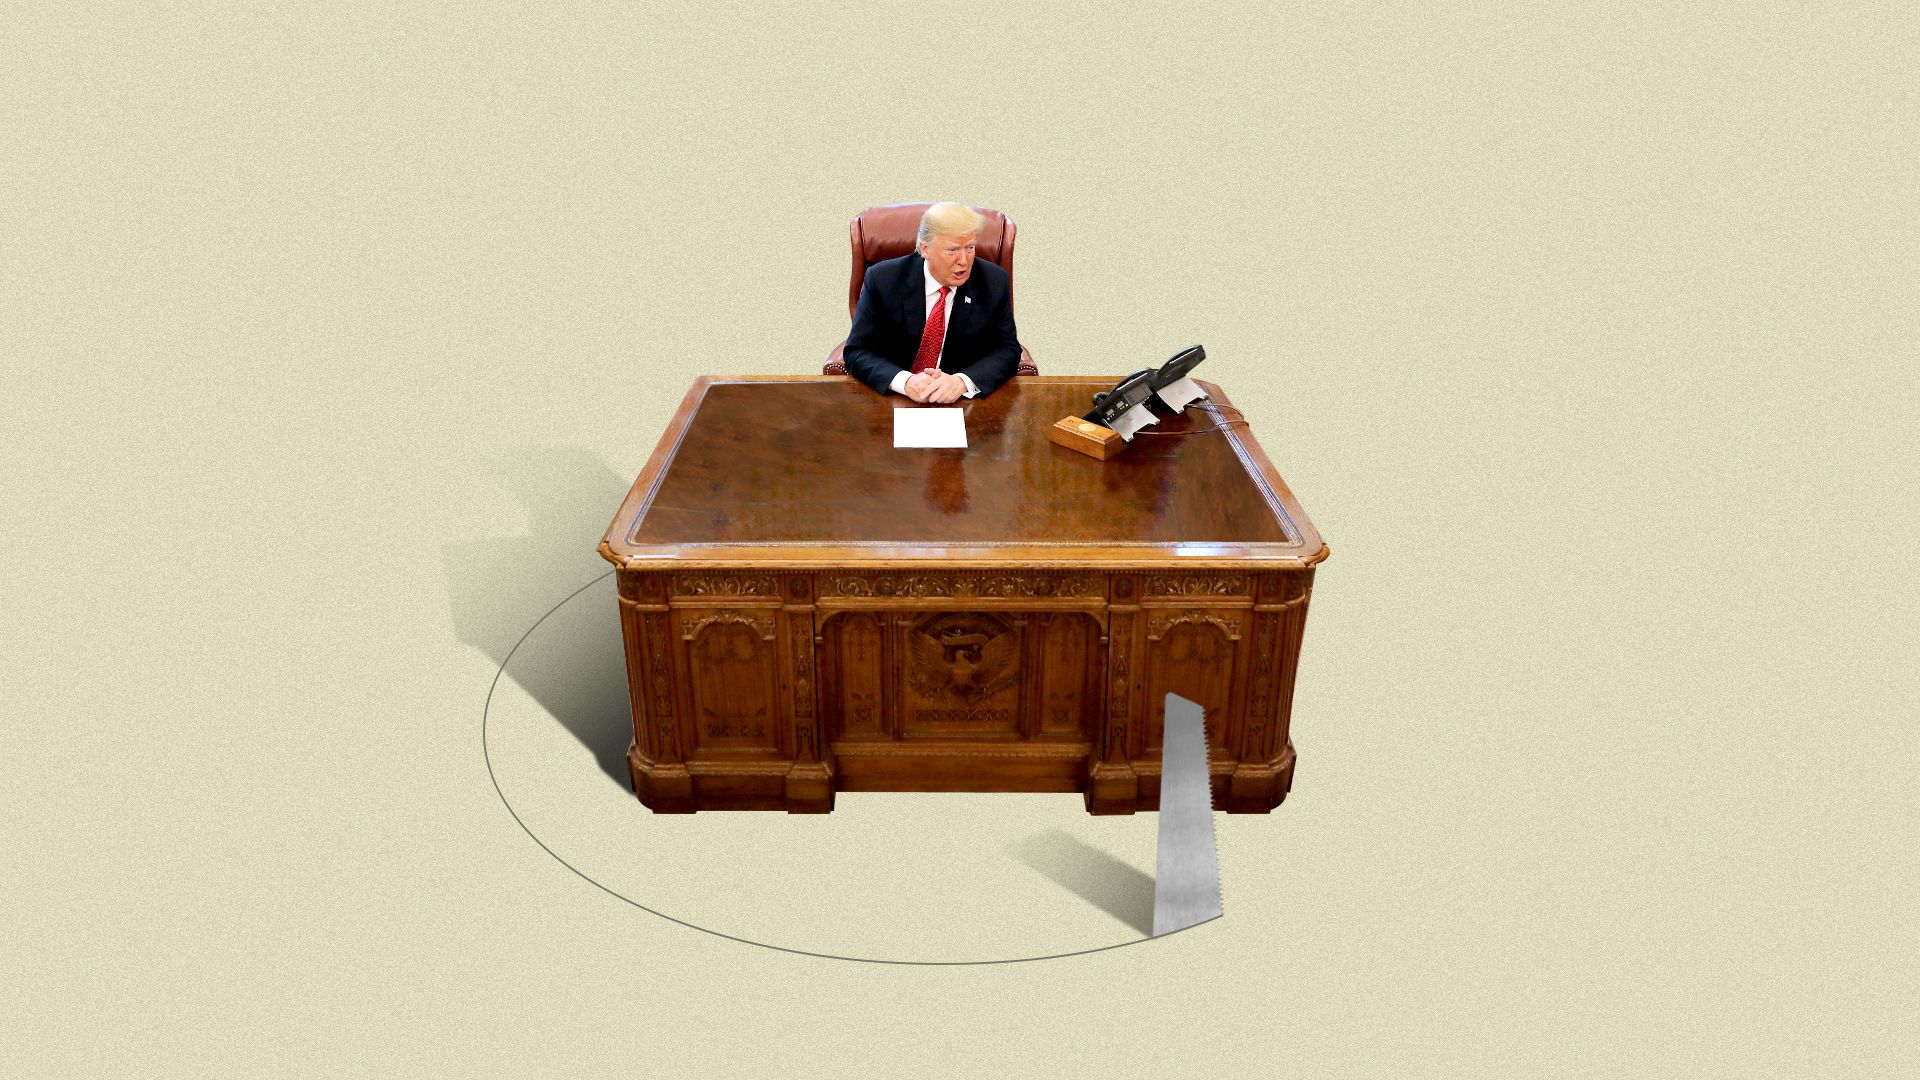 Illustration of President Trump sitting at his desk, a saw is cutting a circle around the desk. Illustration of President Trump sitting at his desk, a saw is cutting a circle around the desk. 